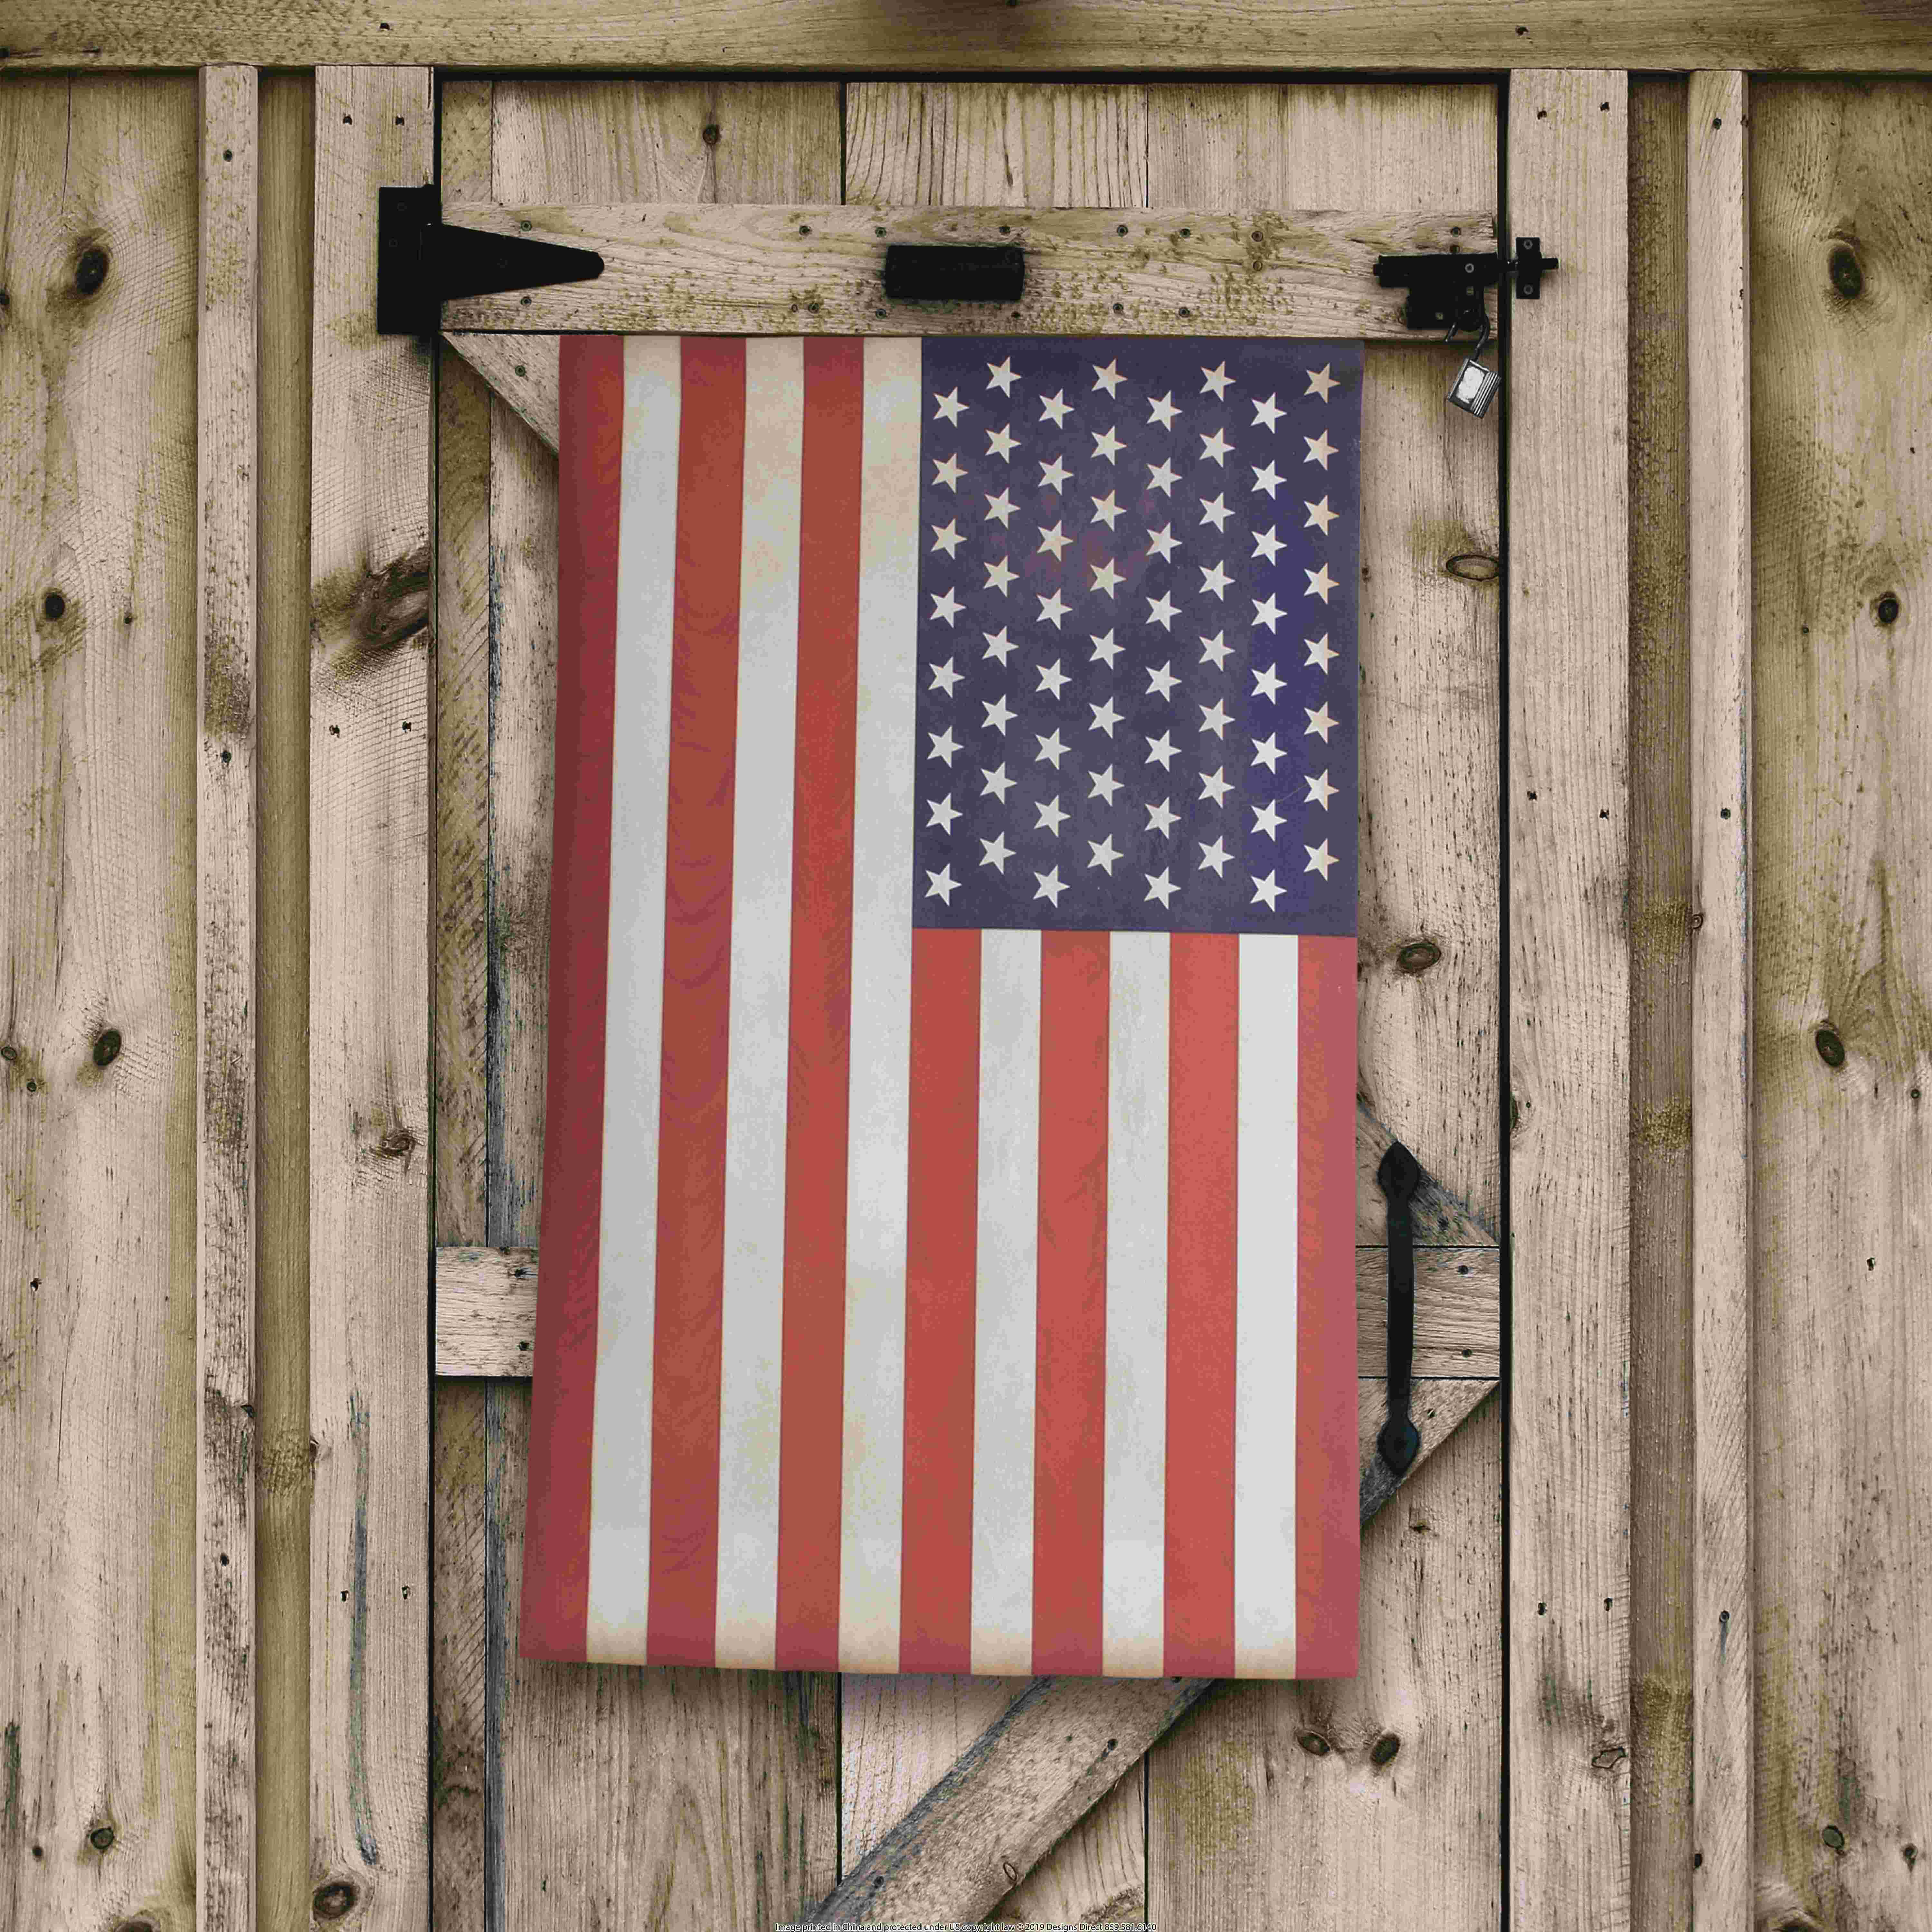 Stupell Industries White Barn with American Flag Wall Art Set